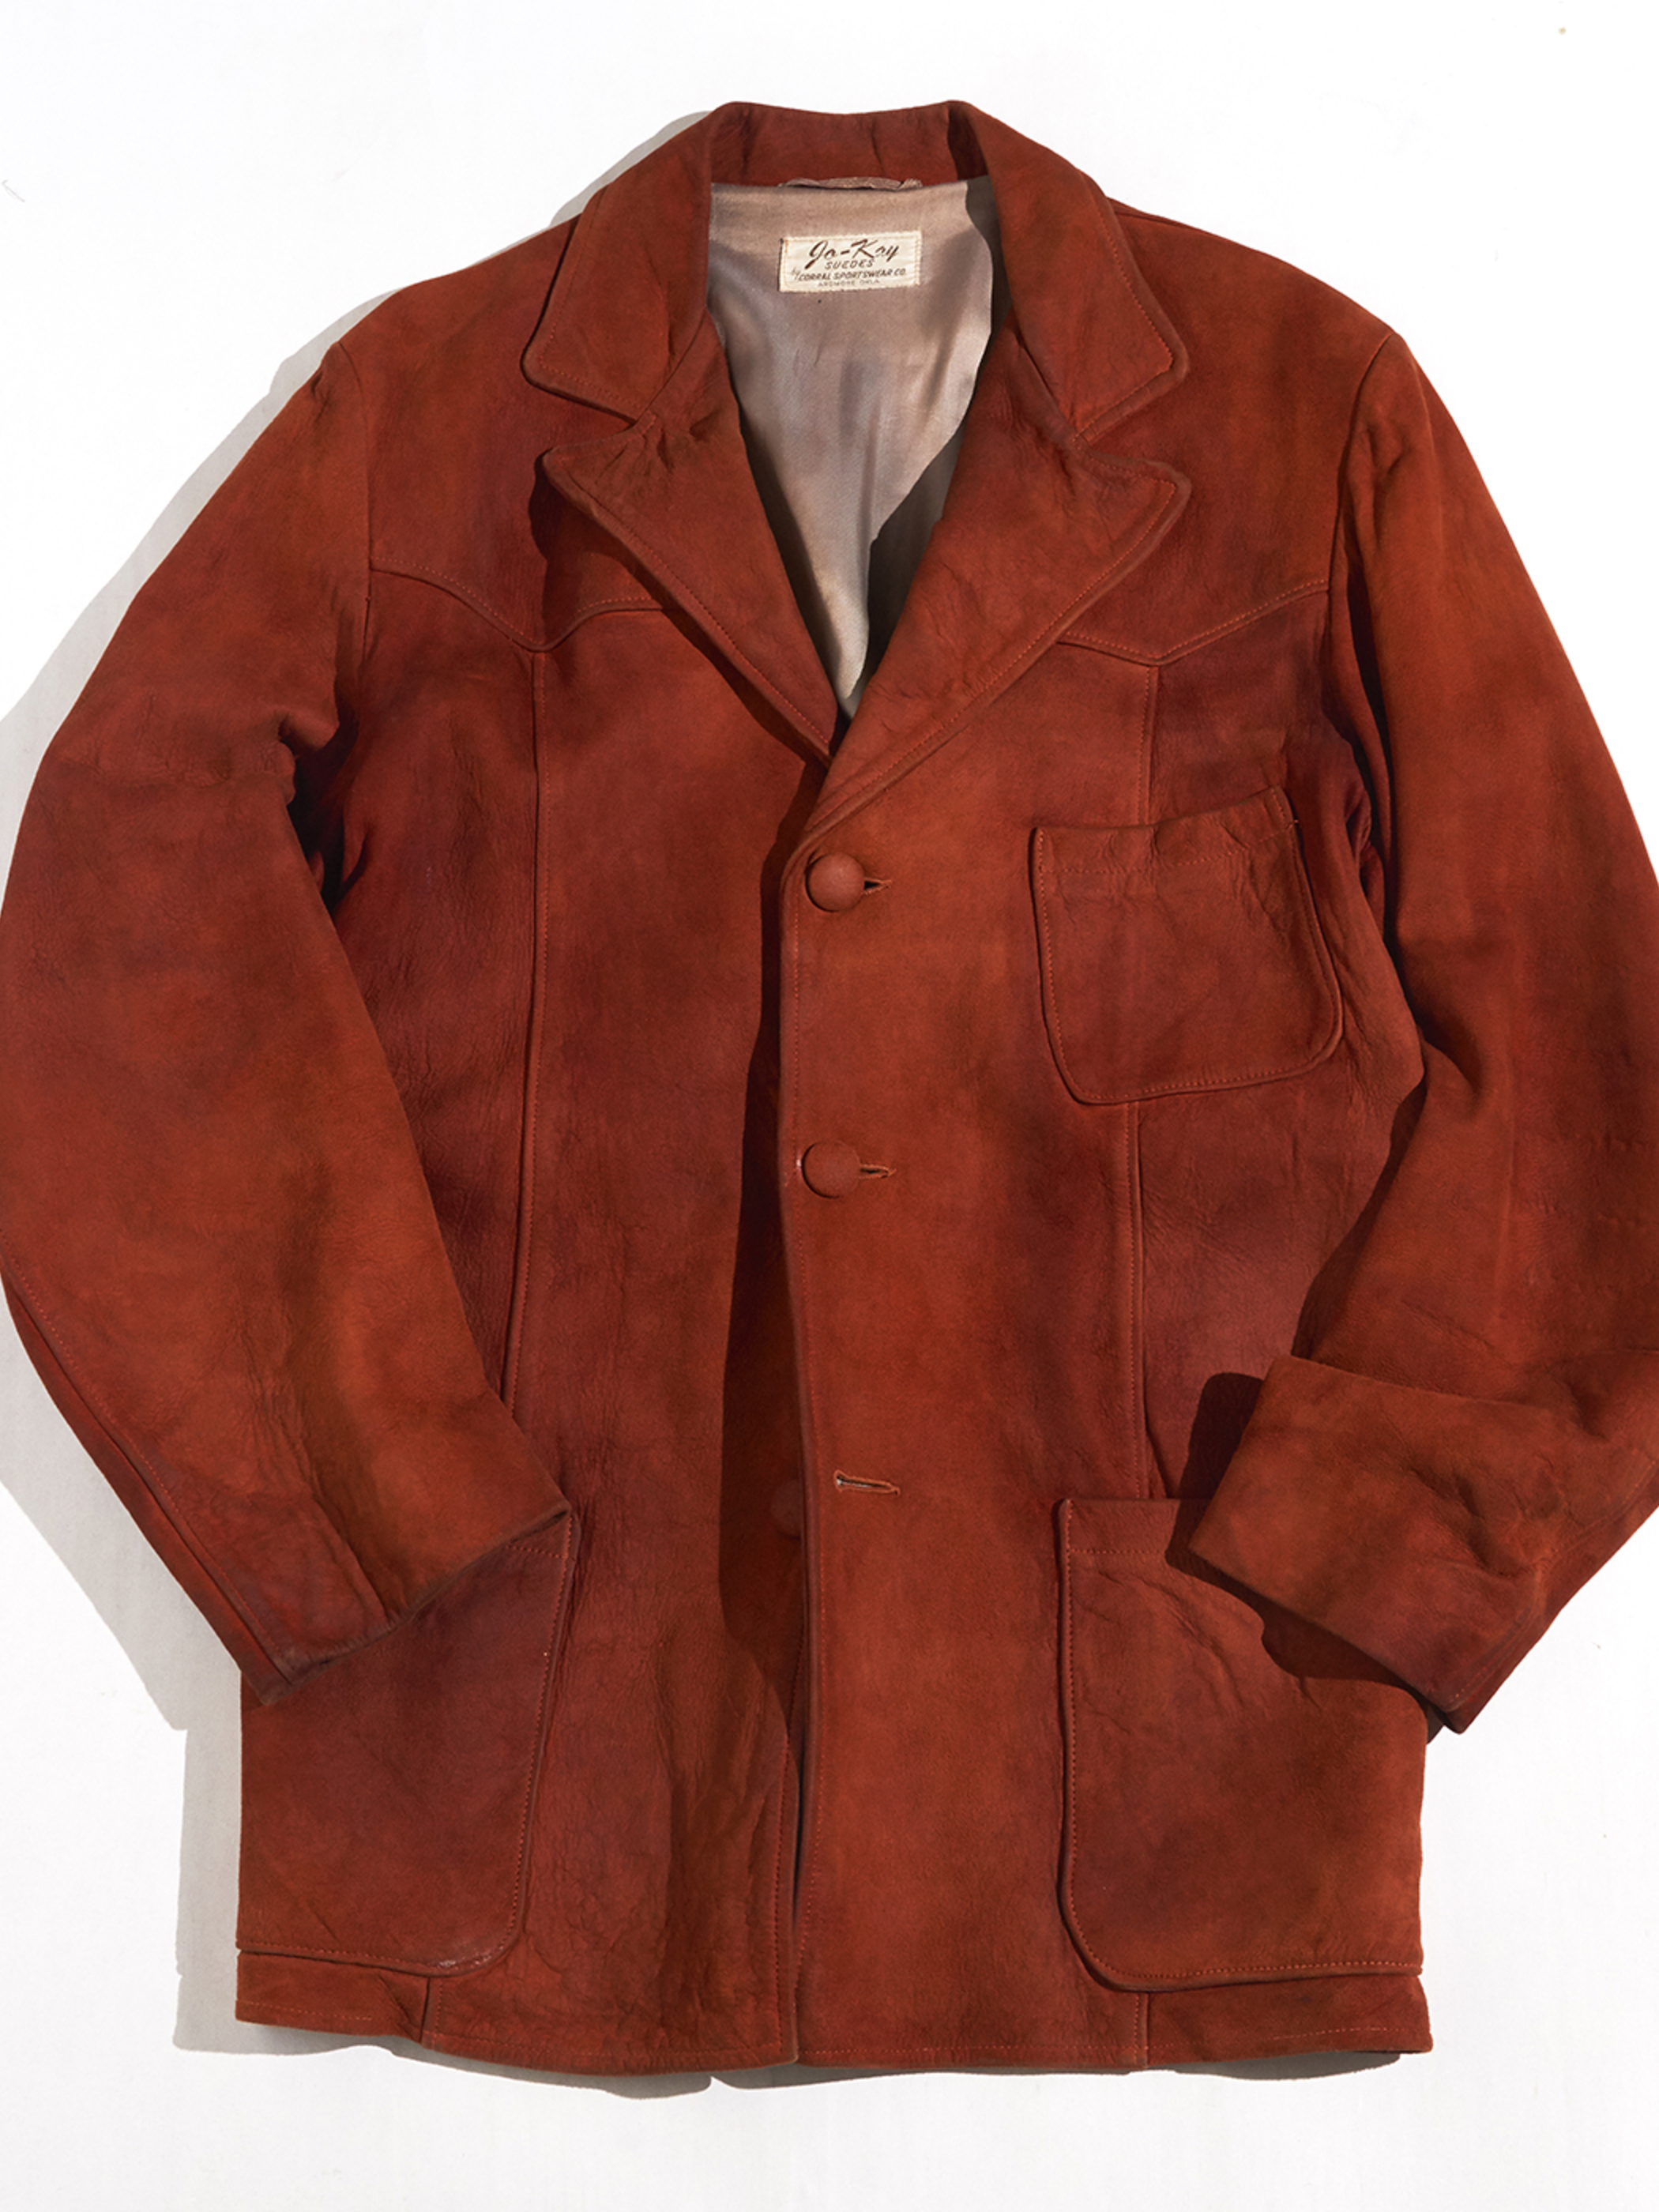 1960s "go-kay" suede leather tailored jacket -REDDISH BROWN-